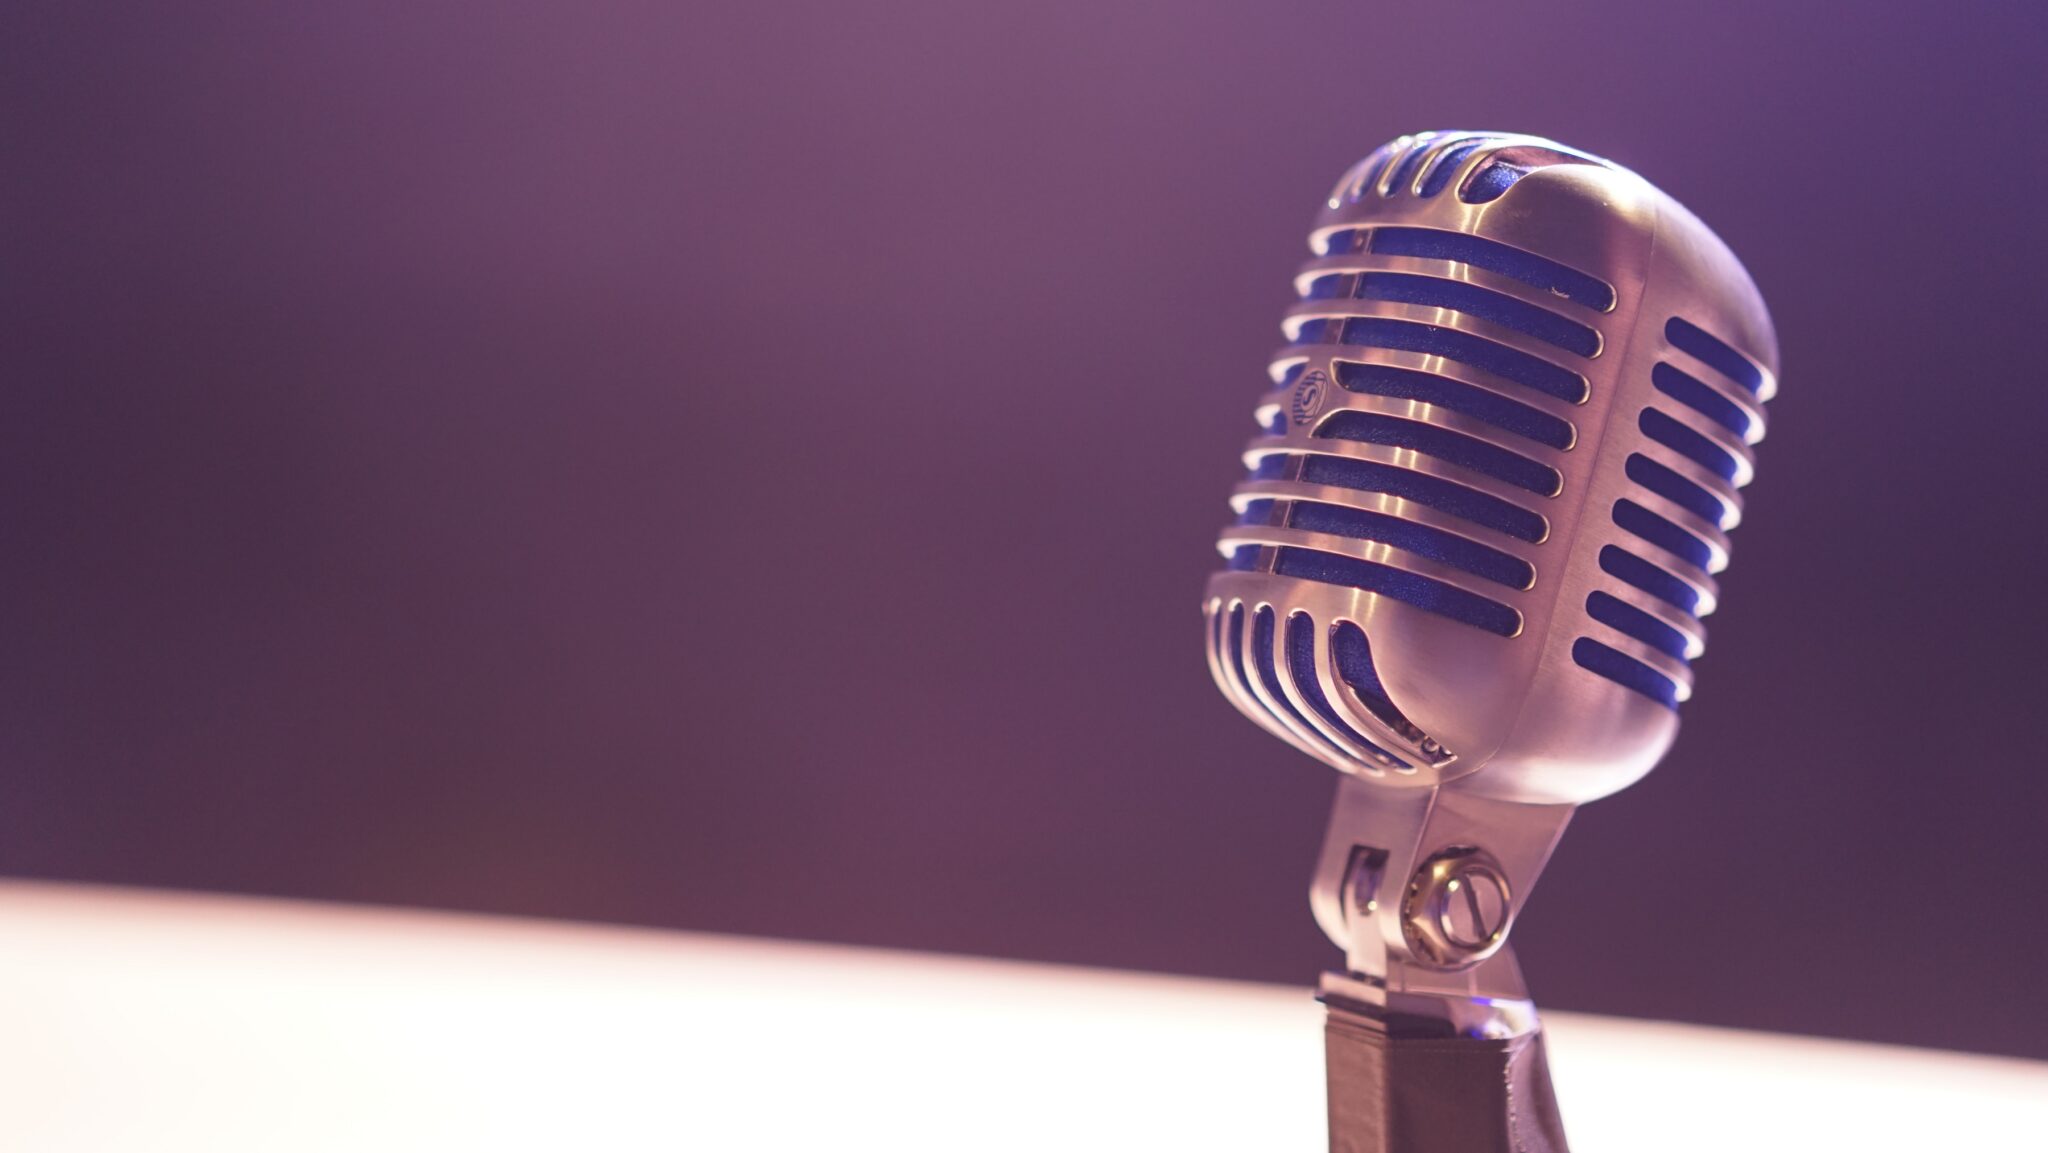 A podcast microphone stands alone in front of a purple background